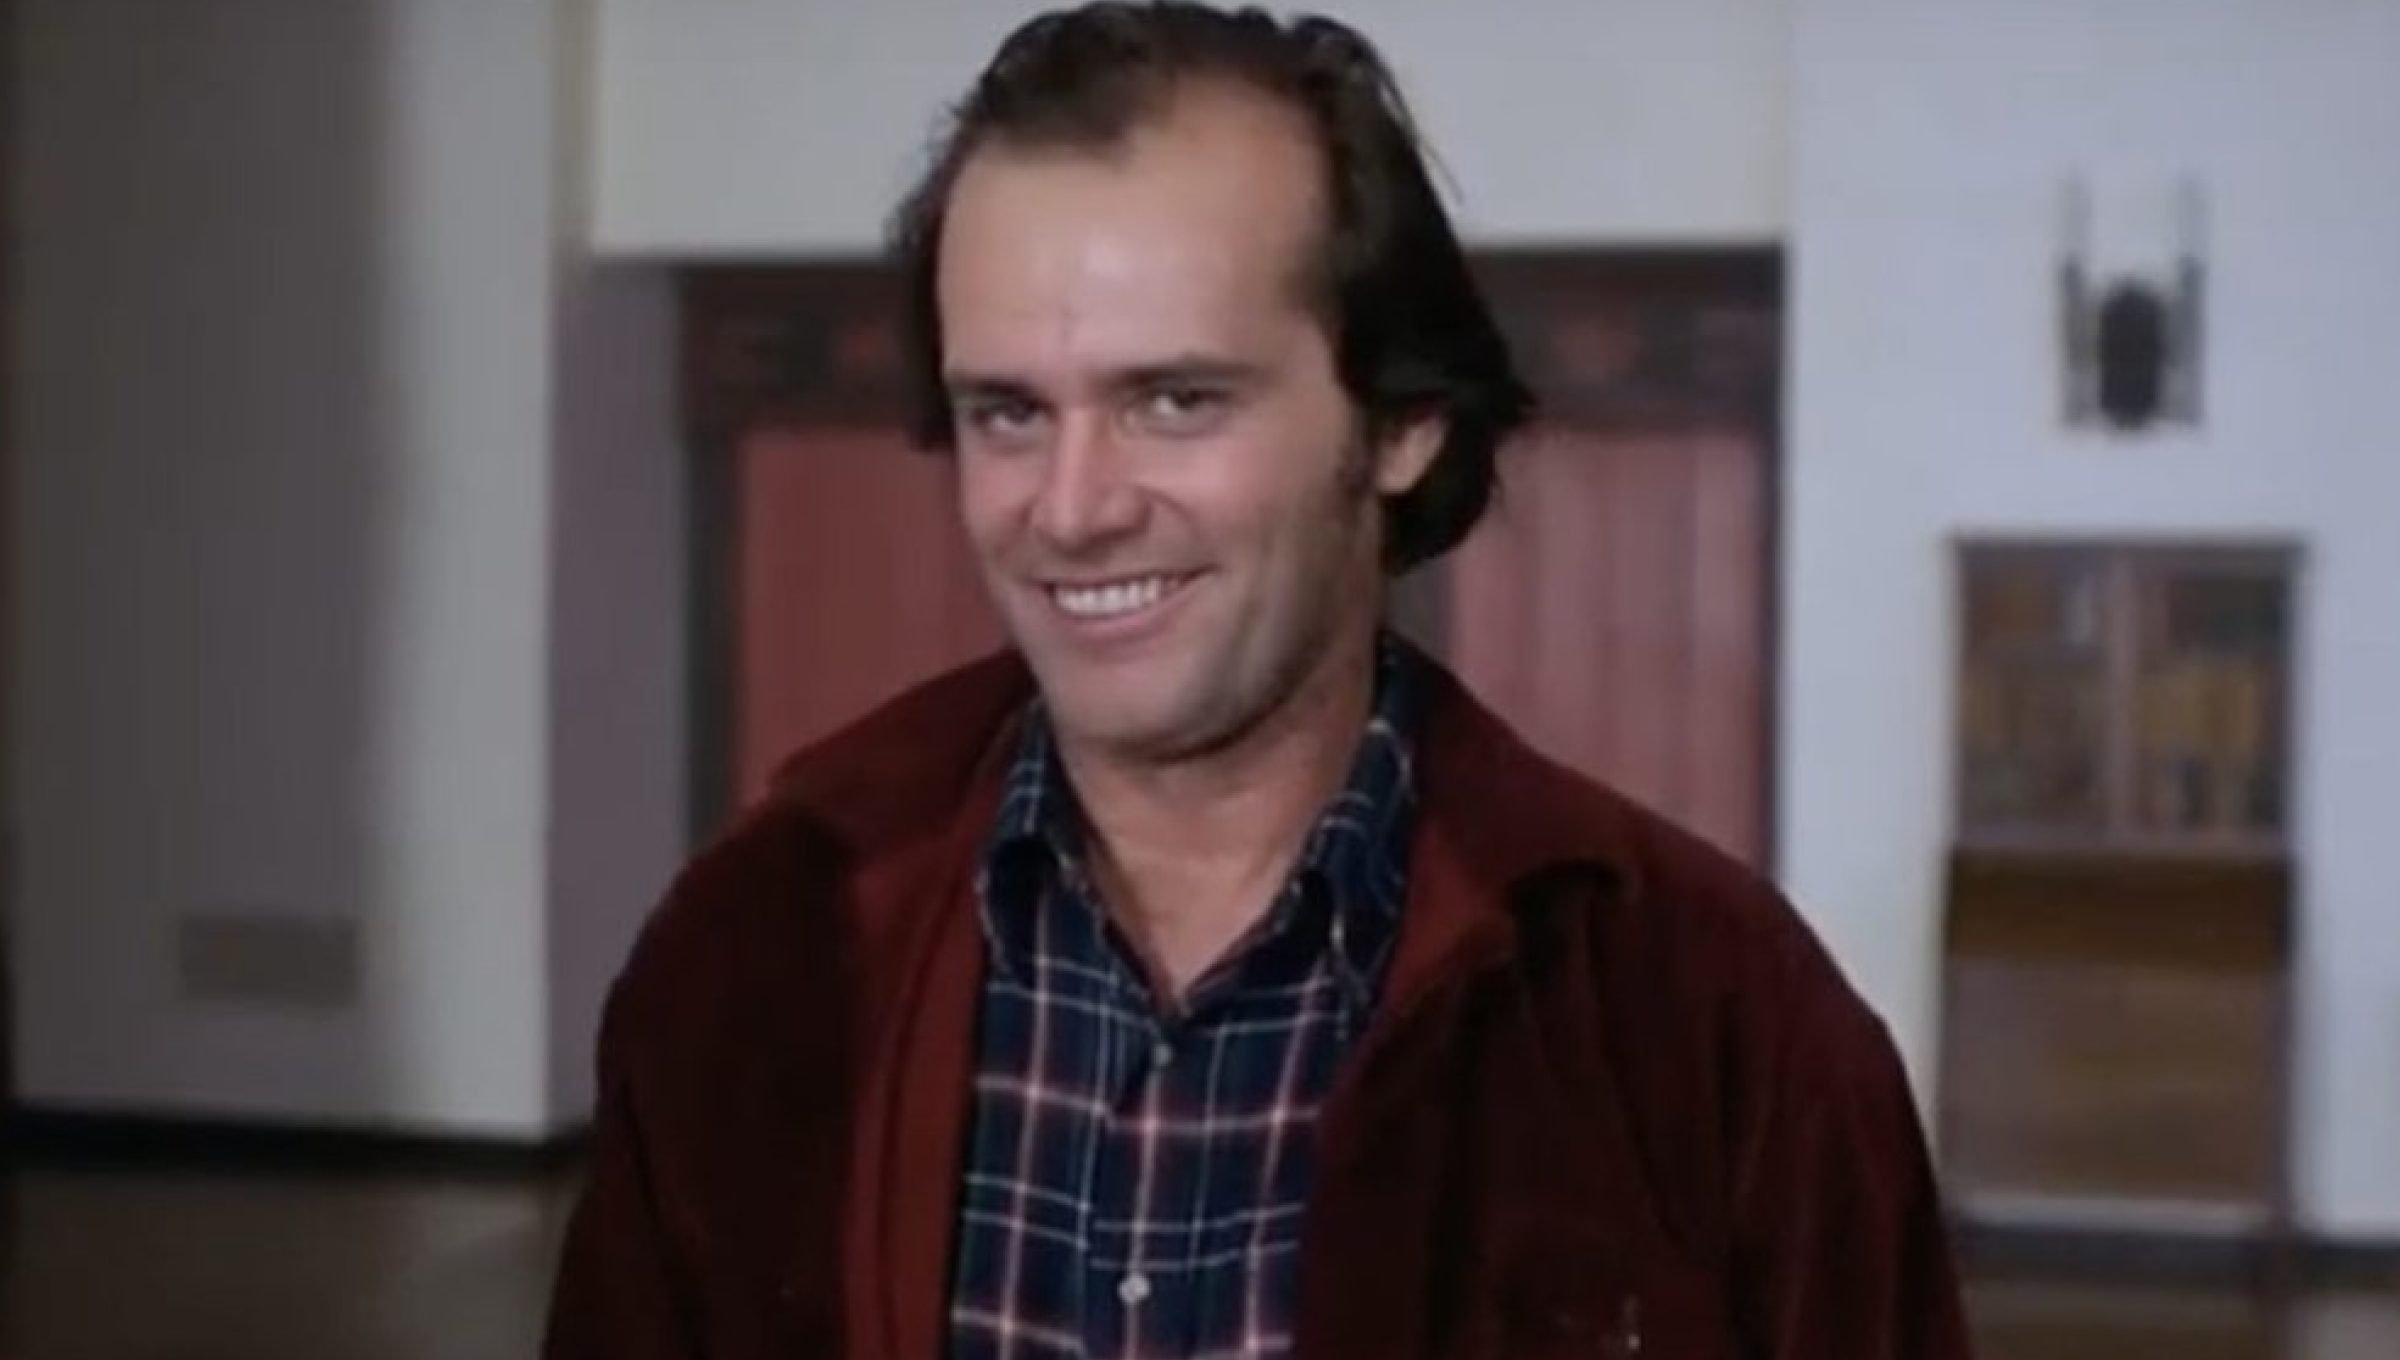 Deepfake: Jim Carrey's face on top of The Shining's character